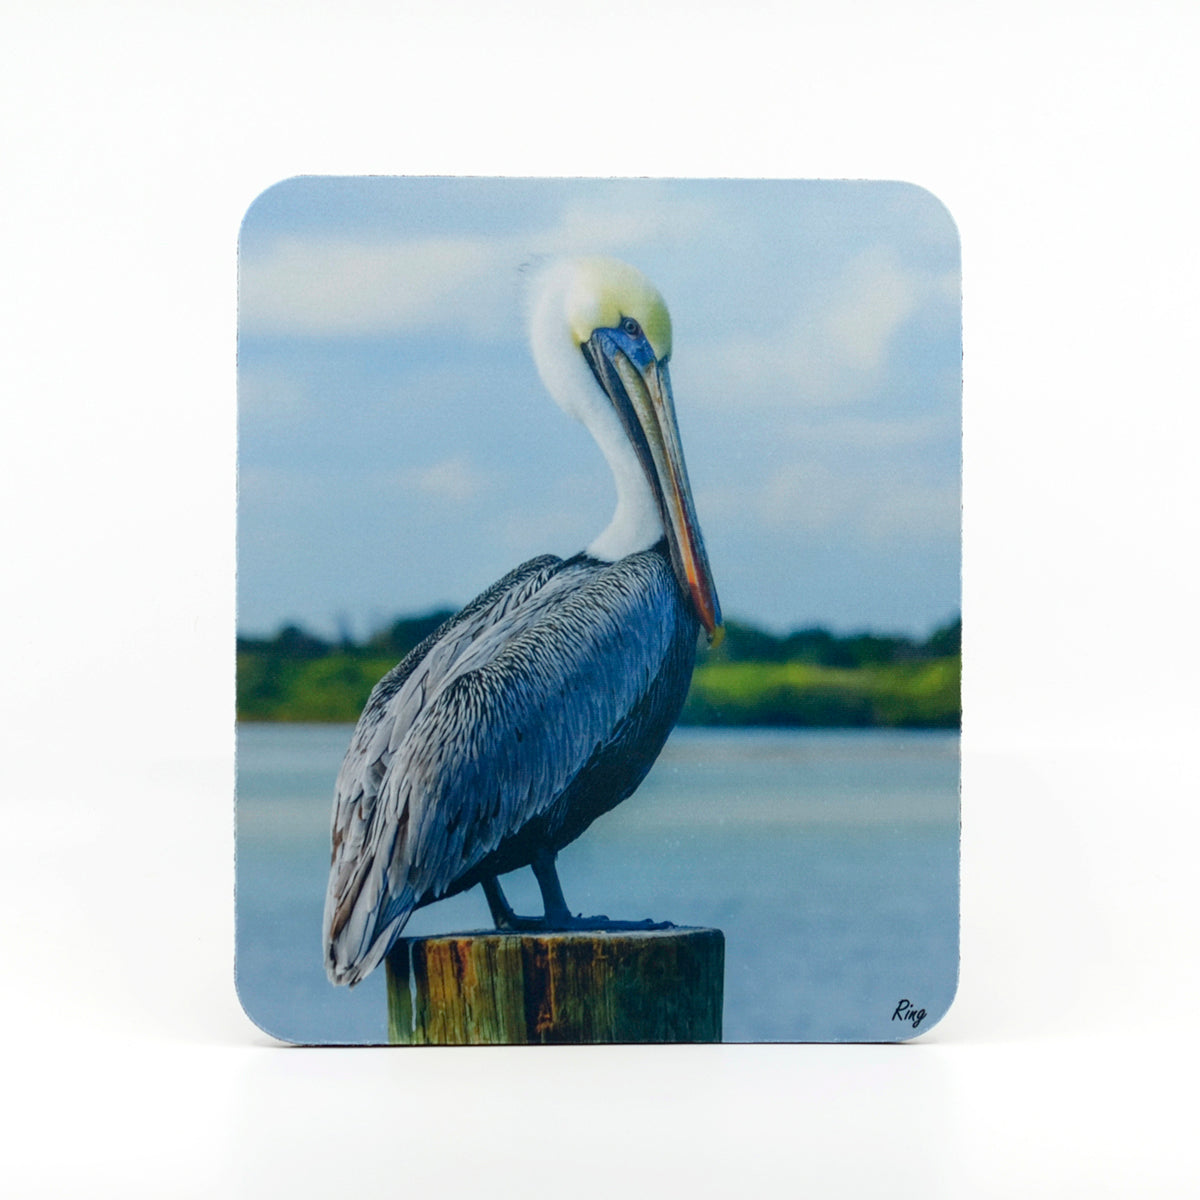 Brown Pelican photograph on a mouse pad